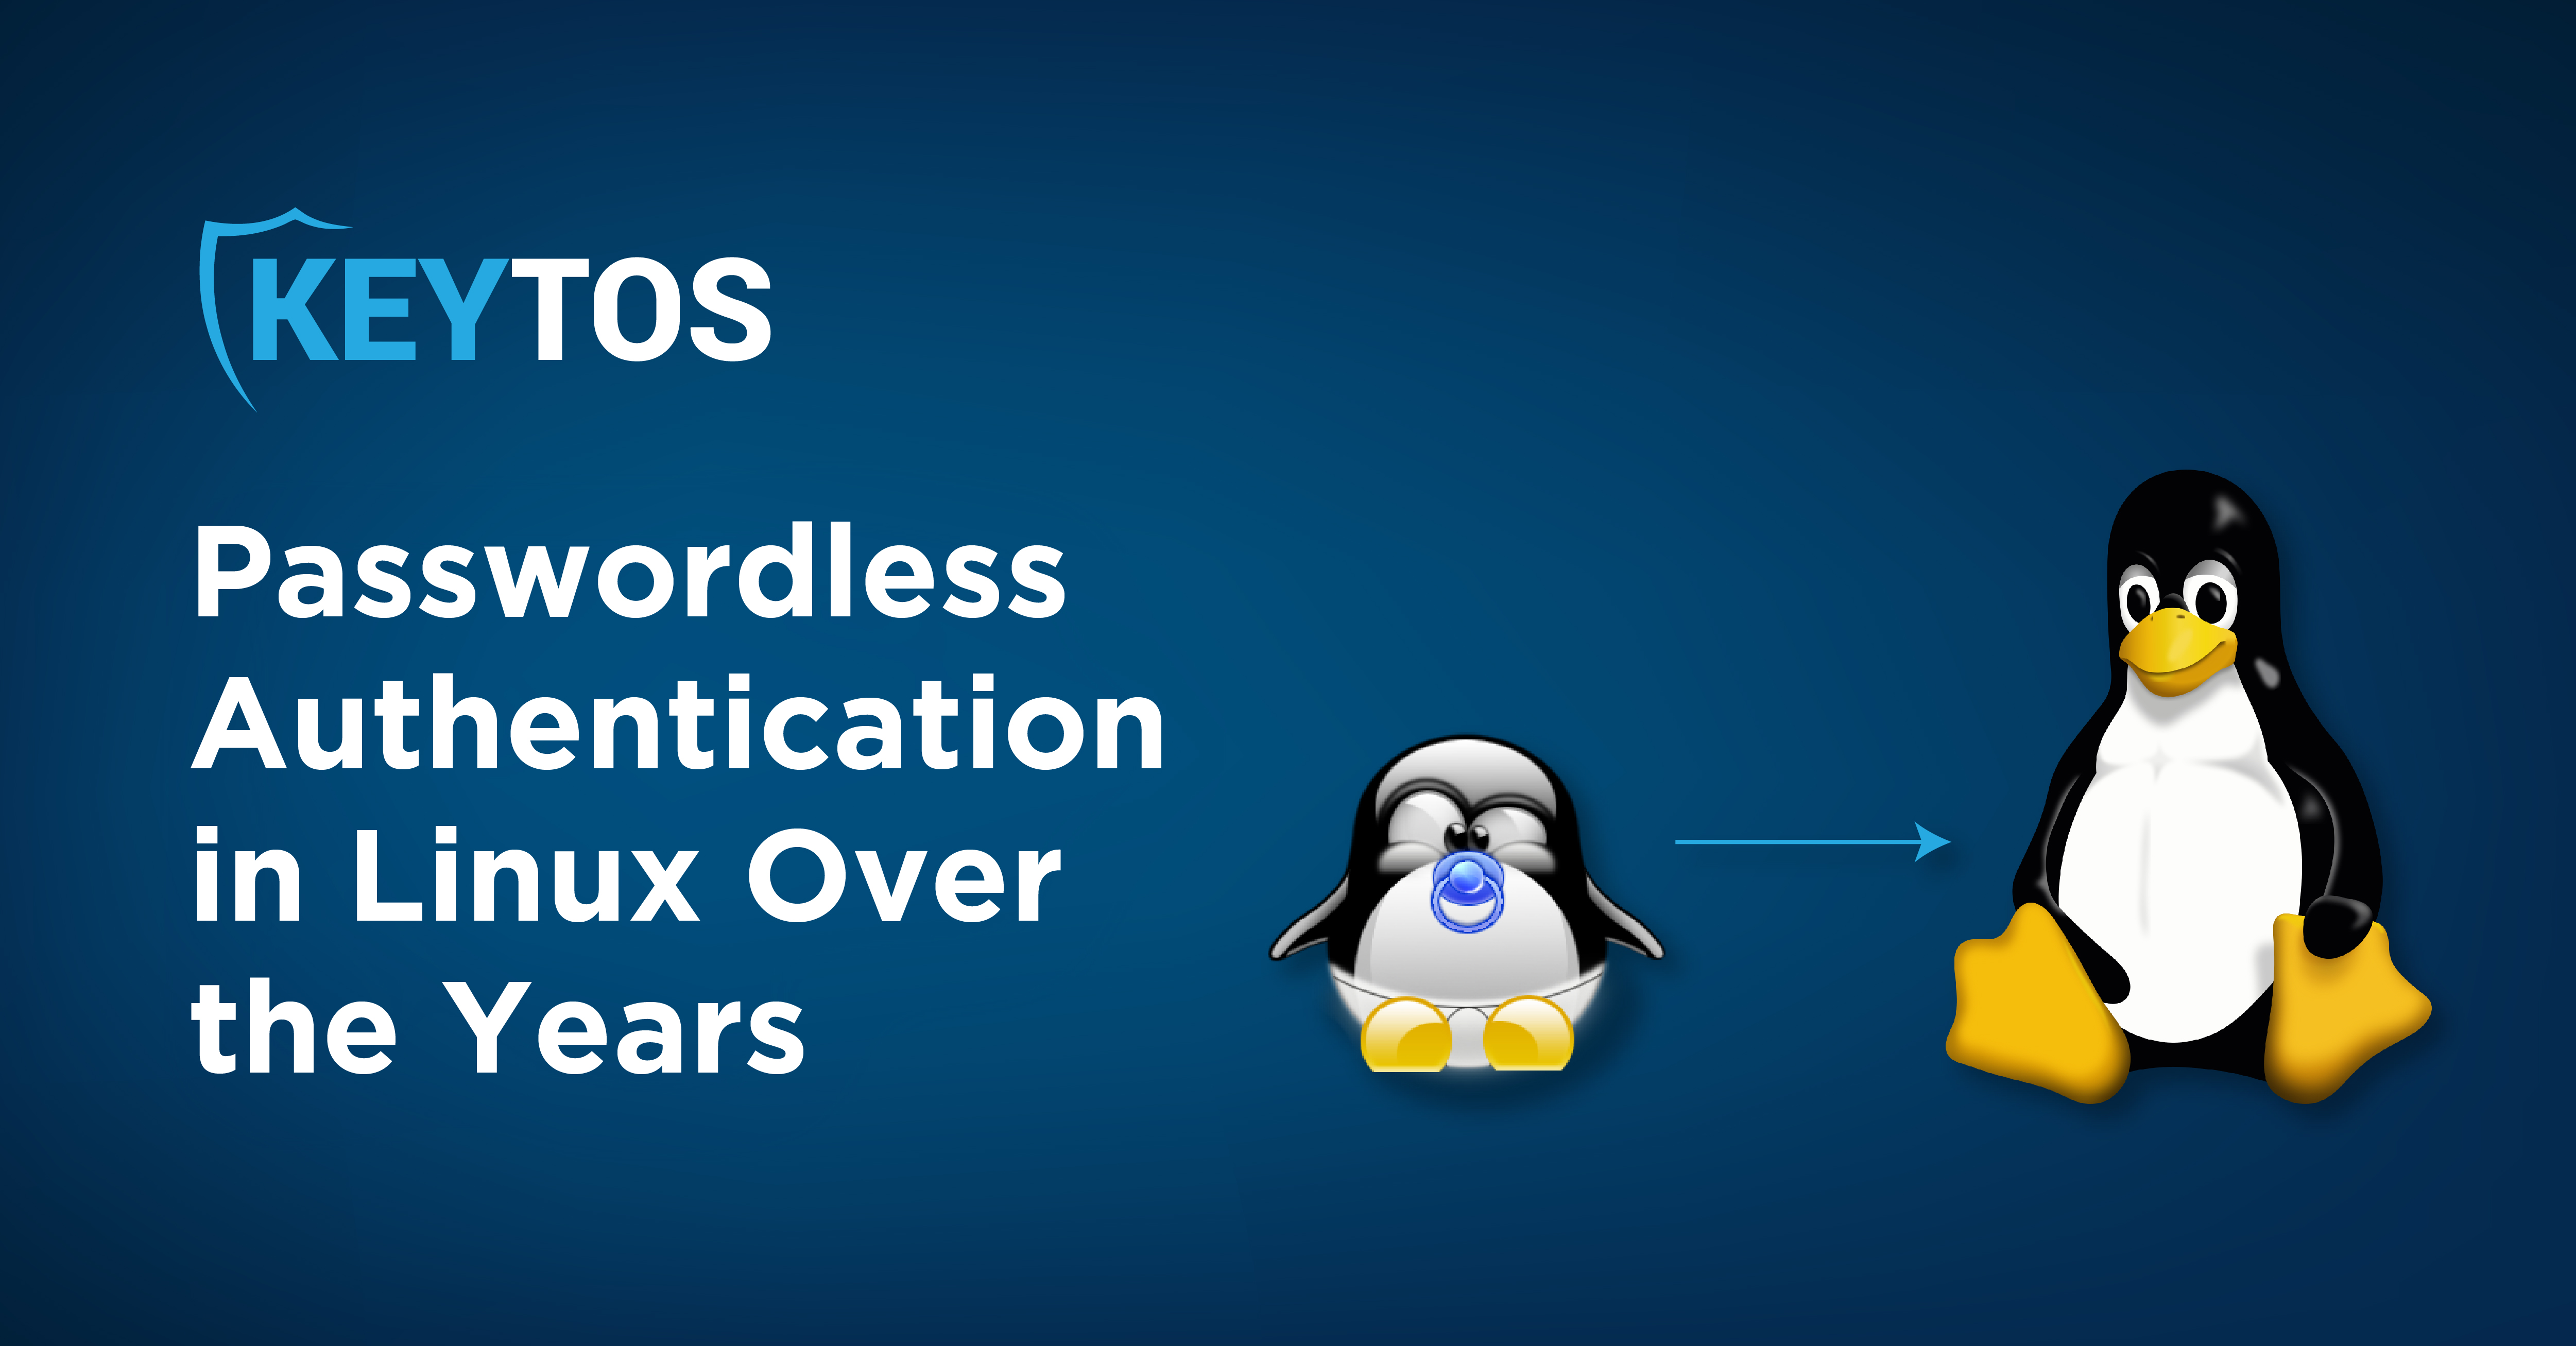 How Has Passwordless Authentication in Linux Changed Over the Years?